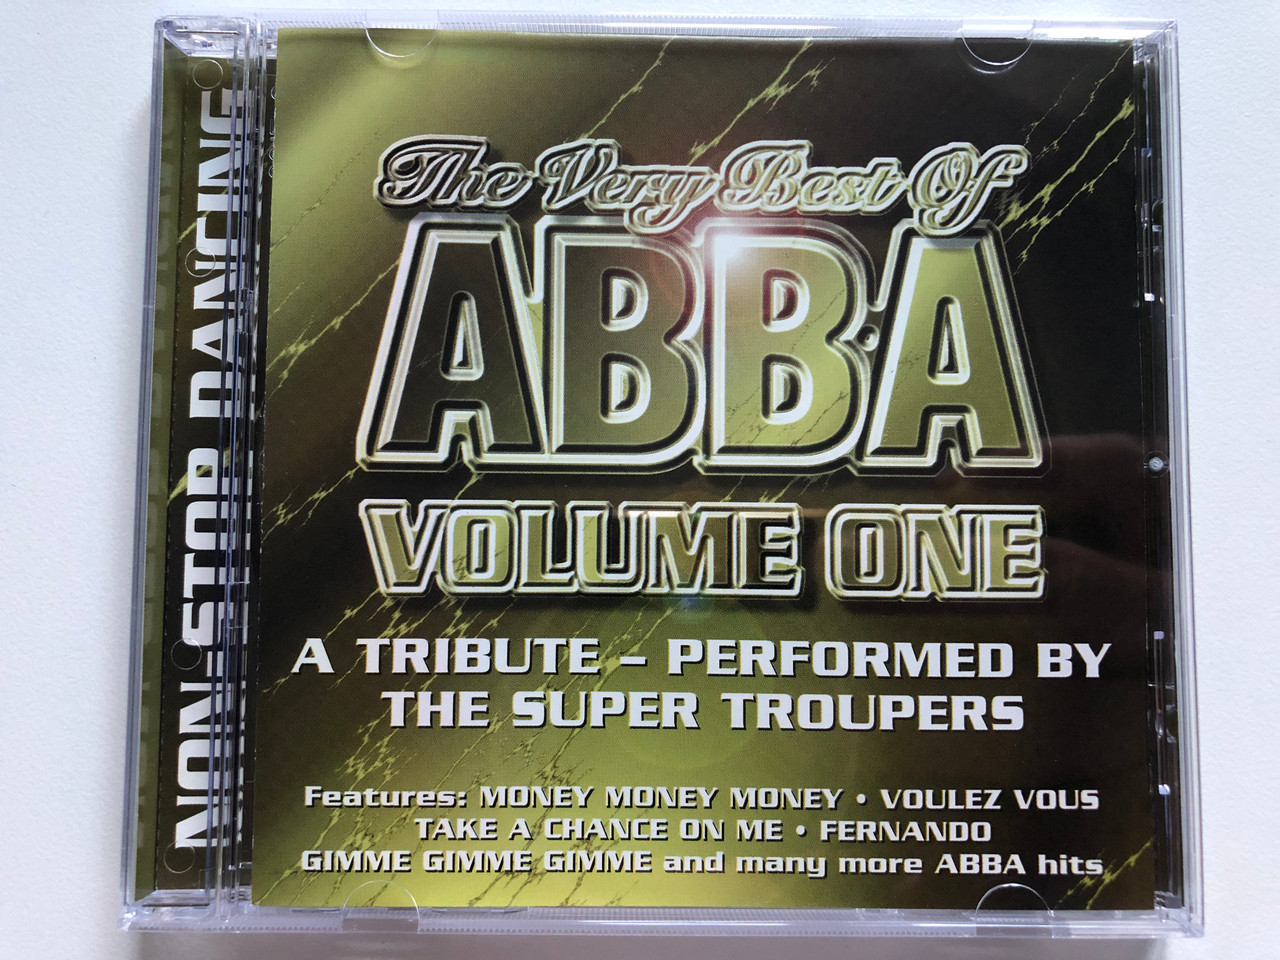 https://cdn10.bigcommerce.com/s-62bdpkt7pb/products/0/images/228489/The_Very_Best_of_Abba_-_Volume_One_-_A_Tribute-Performed_By_The_Super_Troupers_Features_Money_Money_Money_Voulez_Vous_Take_A_Chance_On_Me_Fernando_Gimme_Gimme_Gimme_Bellevue_Entertainme_1__43700.1653371747.1280.1280.JPG?c=2&_gl=1*18x2awr*_ga*MjA2NTIxMjE2MC4xNTkwNTEyNTMy*_ga_WS2VZYPC6G*MTY1MzM3MTM3Ni40MDguMC4xNjUzMzcxMzc2LjYw